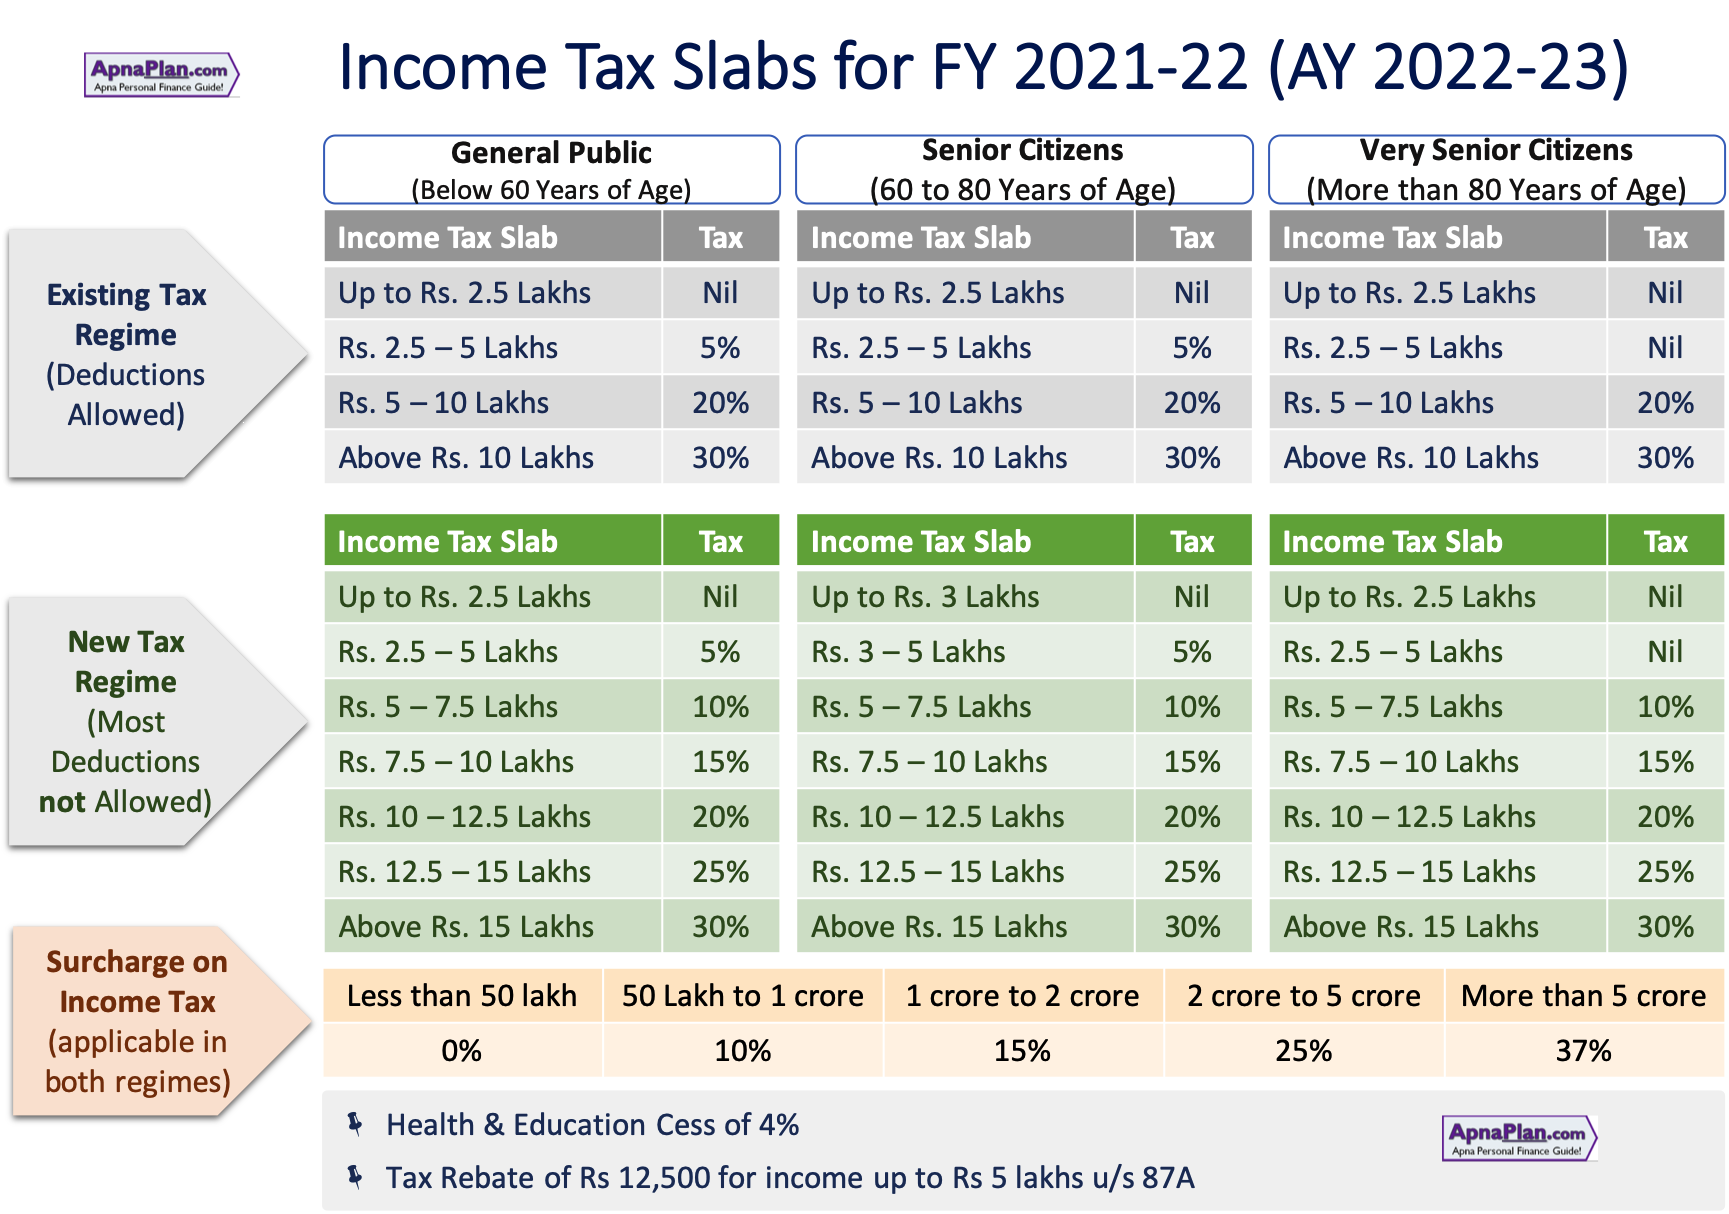 income-tax-rates-slab-for-fy-2021-22-or-ay-2022-23-ebizfiling